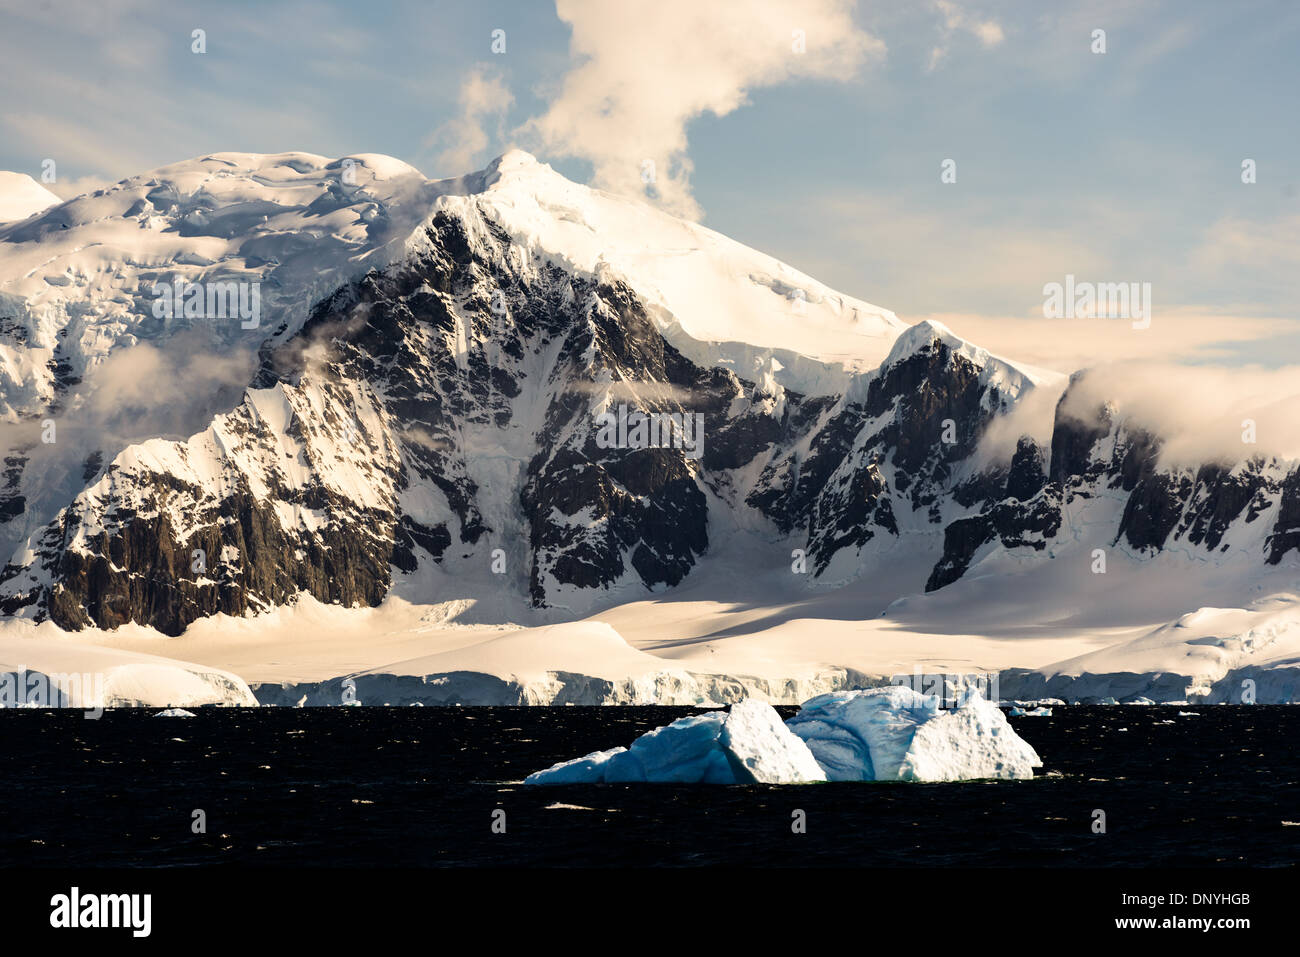 ANTARCTICA - Dramatic snow and ice-covered mountains rise up from the shoreline of the Gerlacht Strait on the western coast of the Antarctic Peninsula. Stock Photo